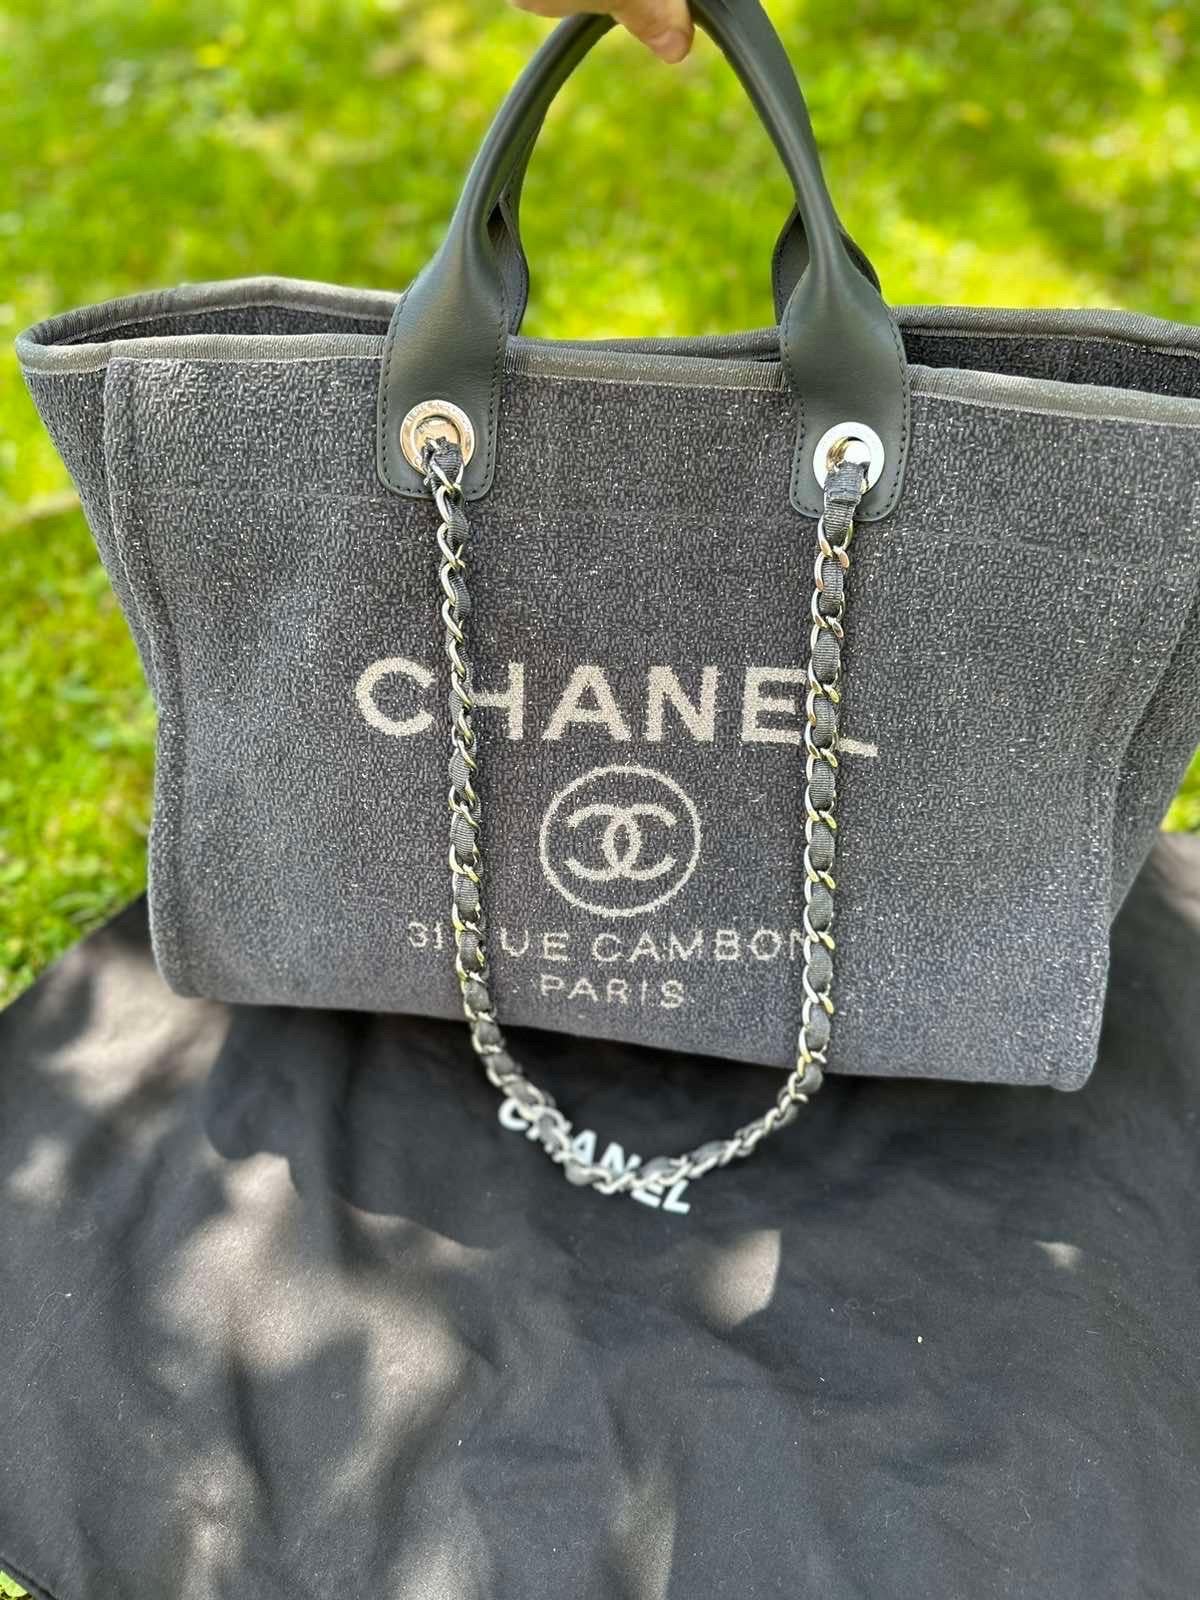 Presenting the Chanel Deauville Tote Bag. This tote bag first originated from Chanel’s Spring/Summer 2012 Collection and is the perfect tote for summer.
Medium size.
Upper width-52 cm
Bottom width-39 cm
Height-30 cm
Very good condition.
No box. No